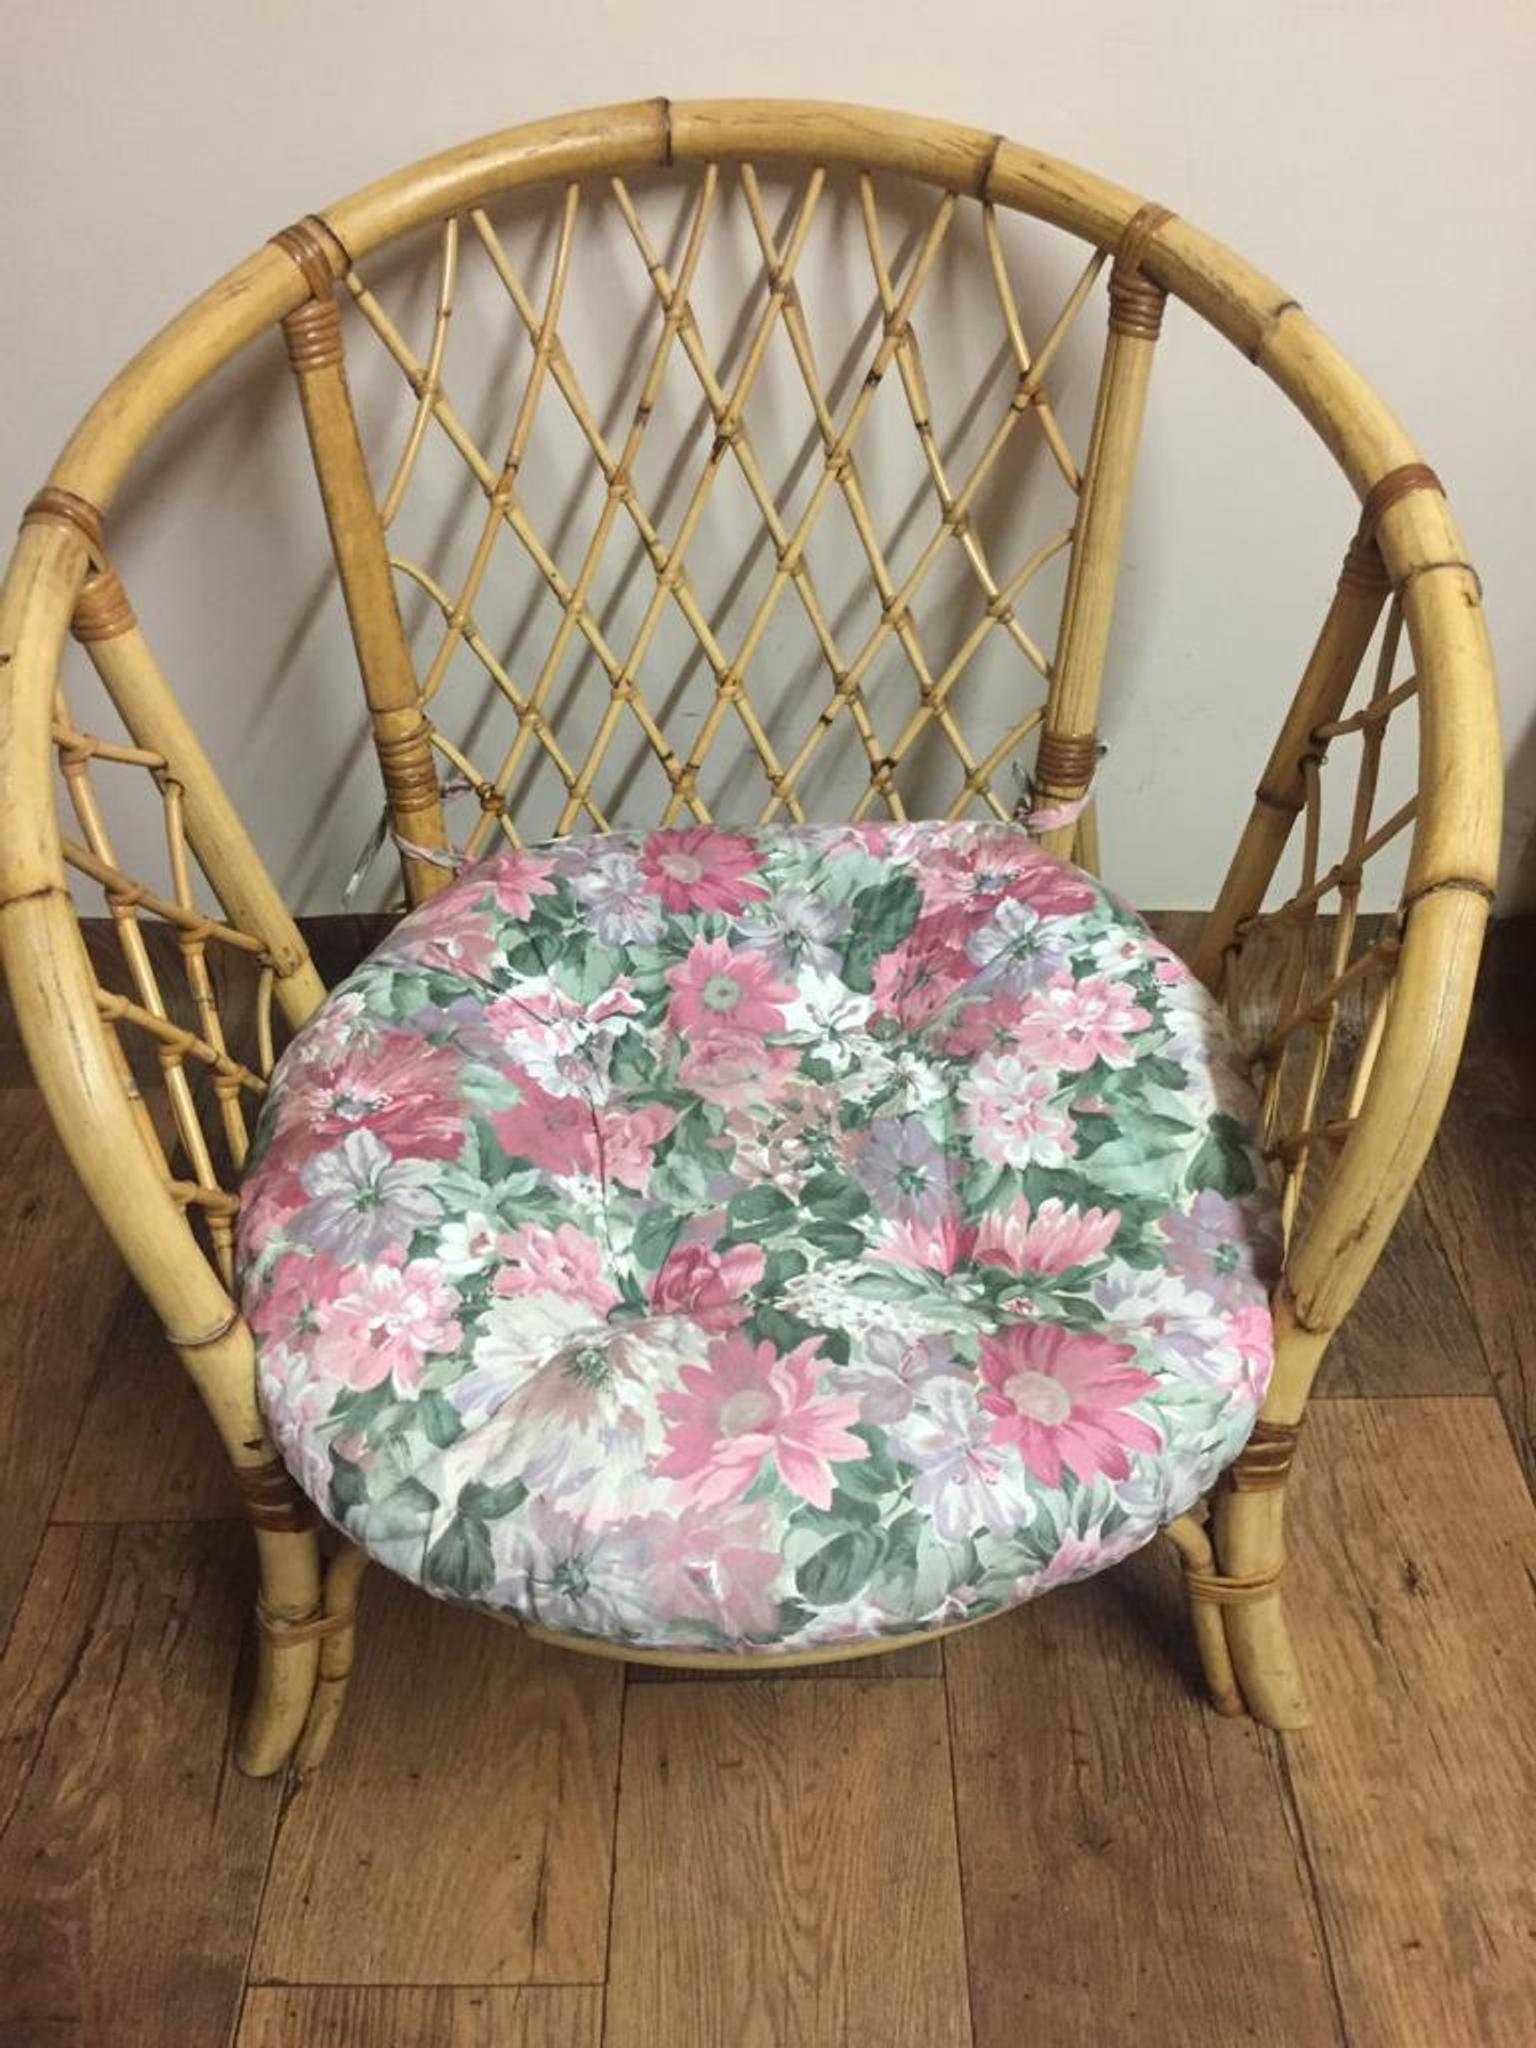 Round Bamboo Chair With Cushion In Bd5 Bradford For 20 00 For